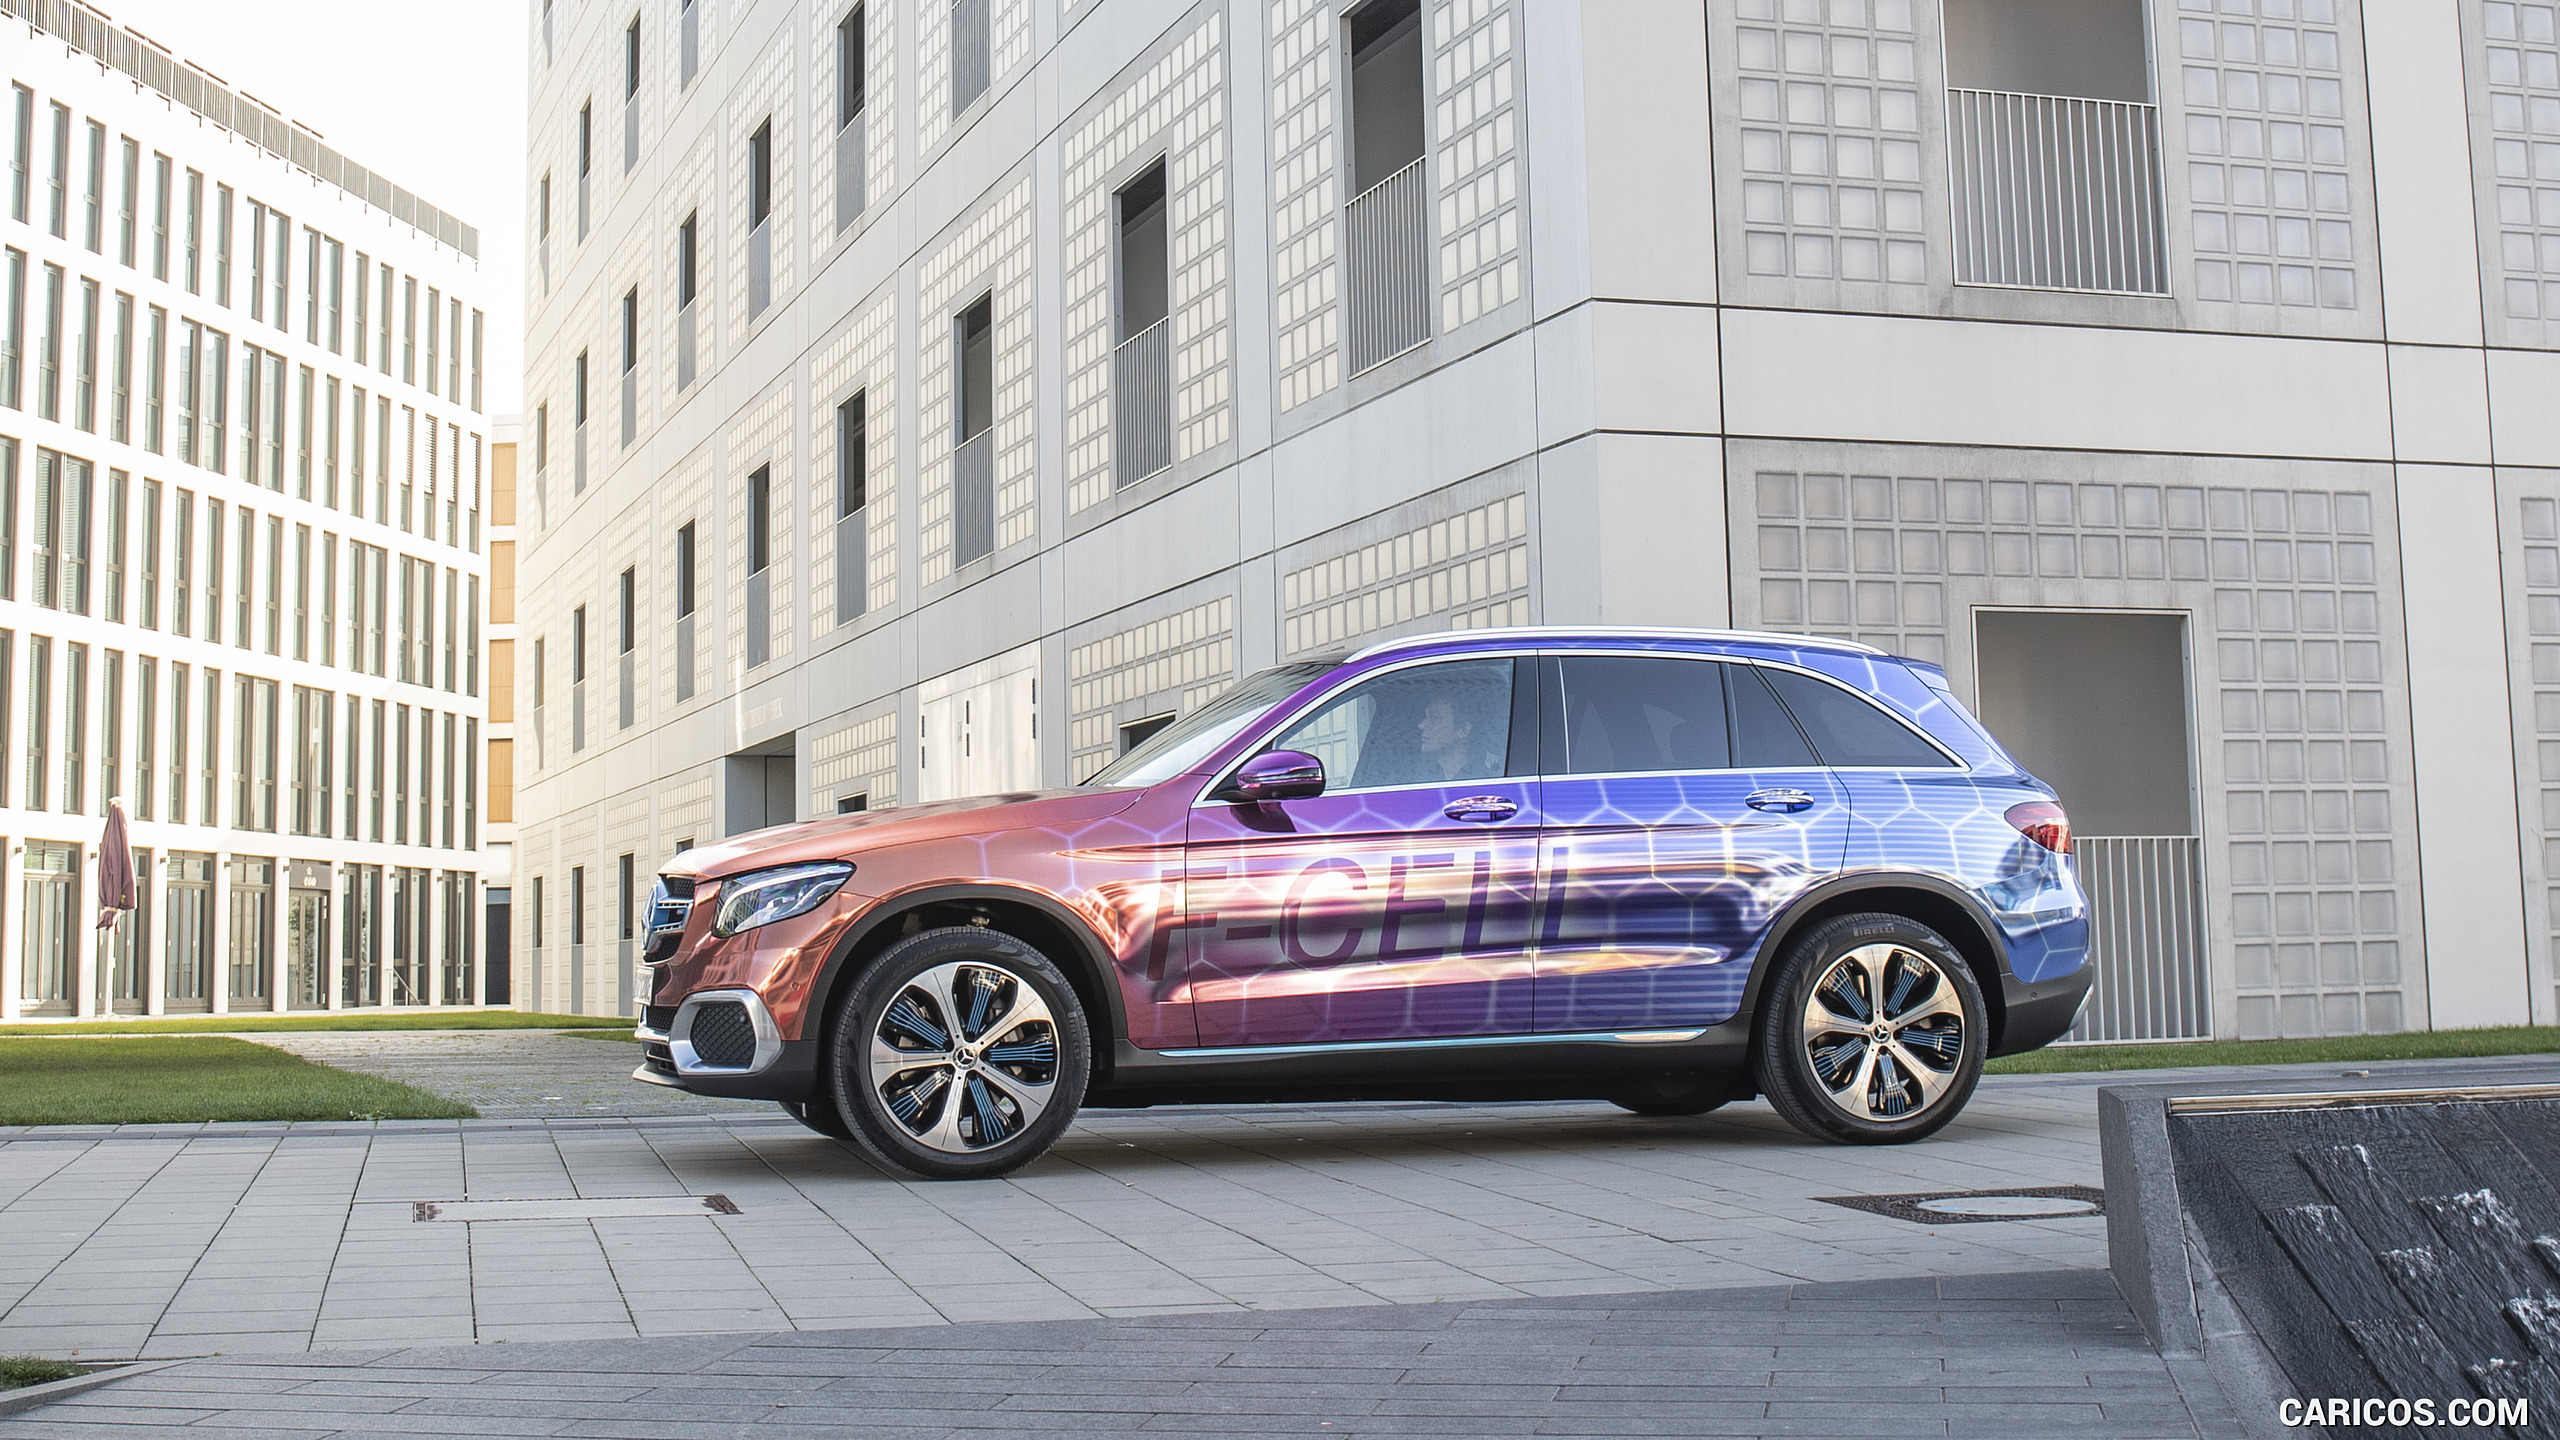 2019 Mercedes-Benz GLC F-CELL - Side, #69 of 95